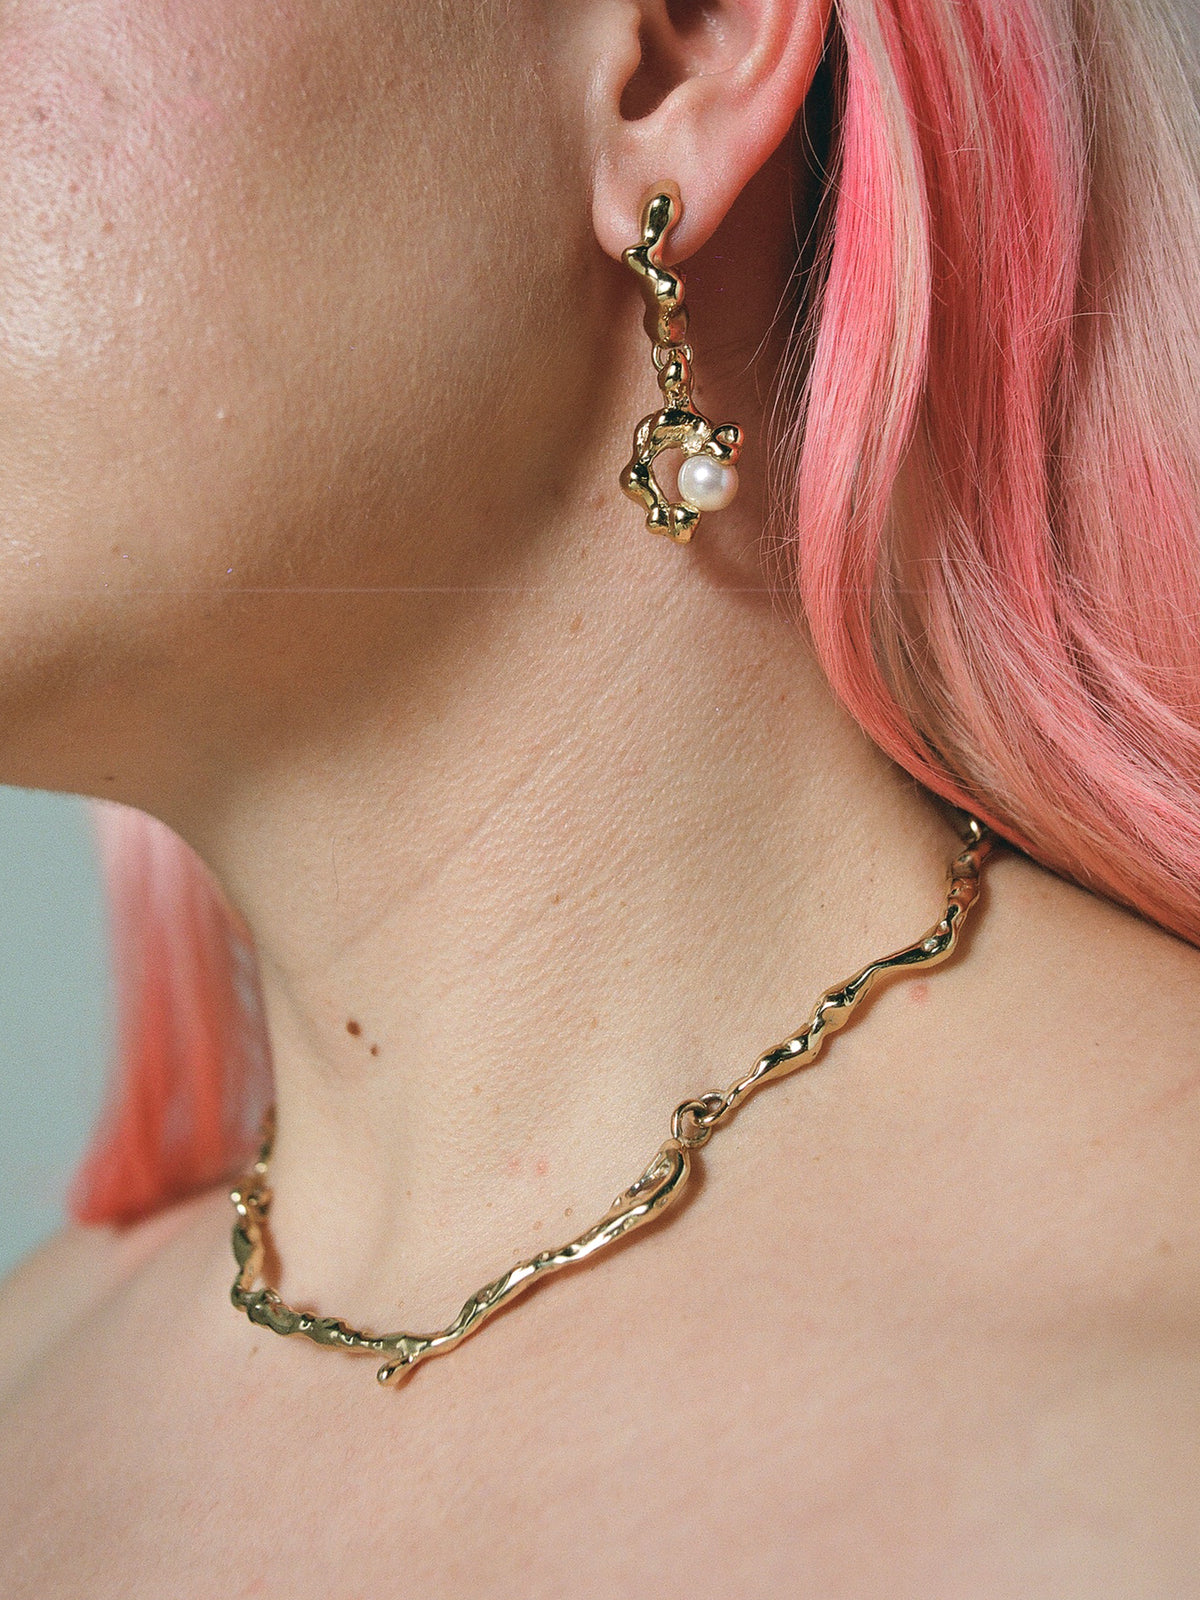 DRIP Collar and FELLINI Drops in 14k gold plate on model